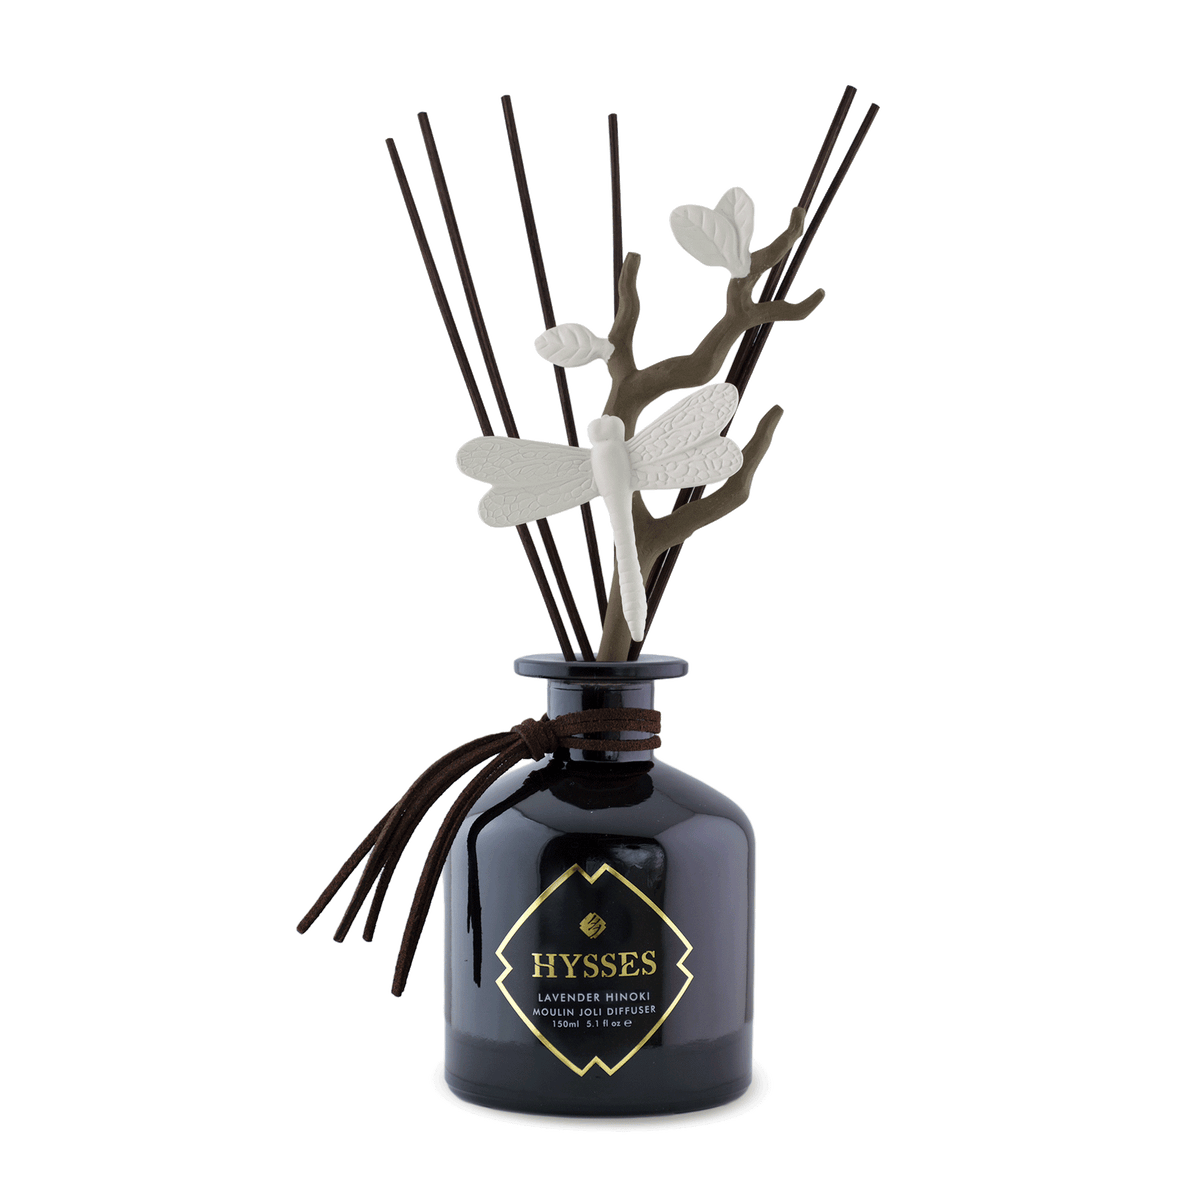 Hysses Home Scents Moulin Joli Diffuser, Dragonfly, Lavender Hinoki